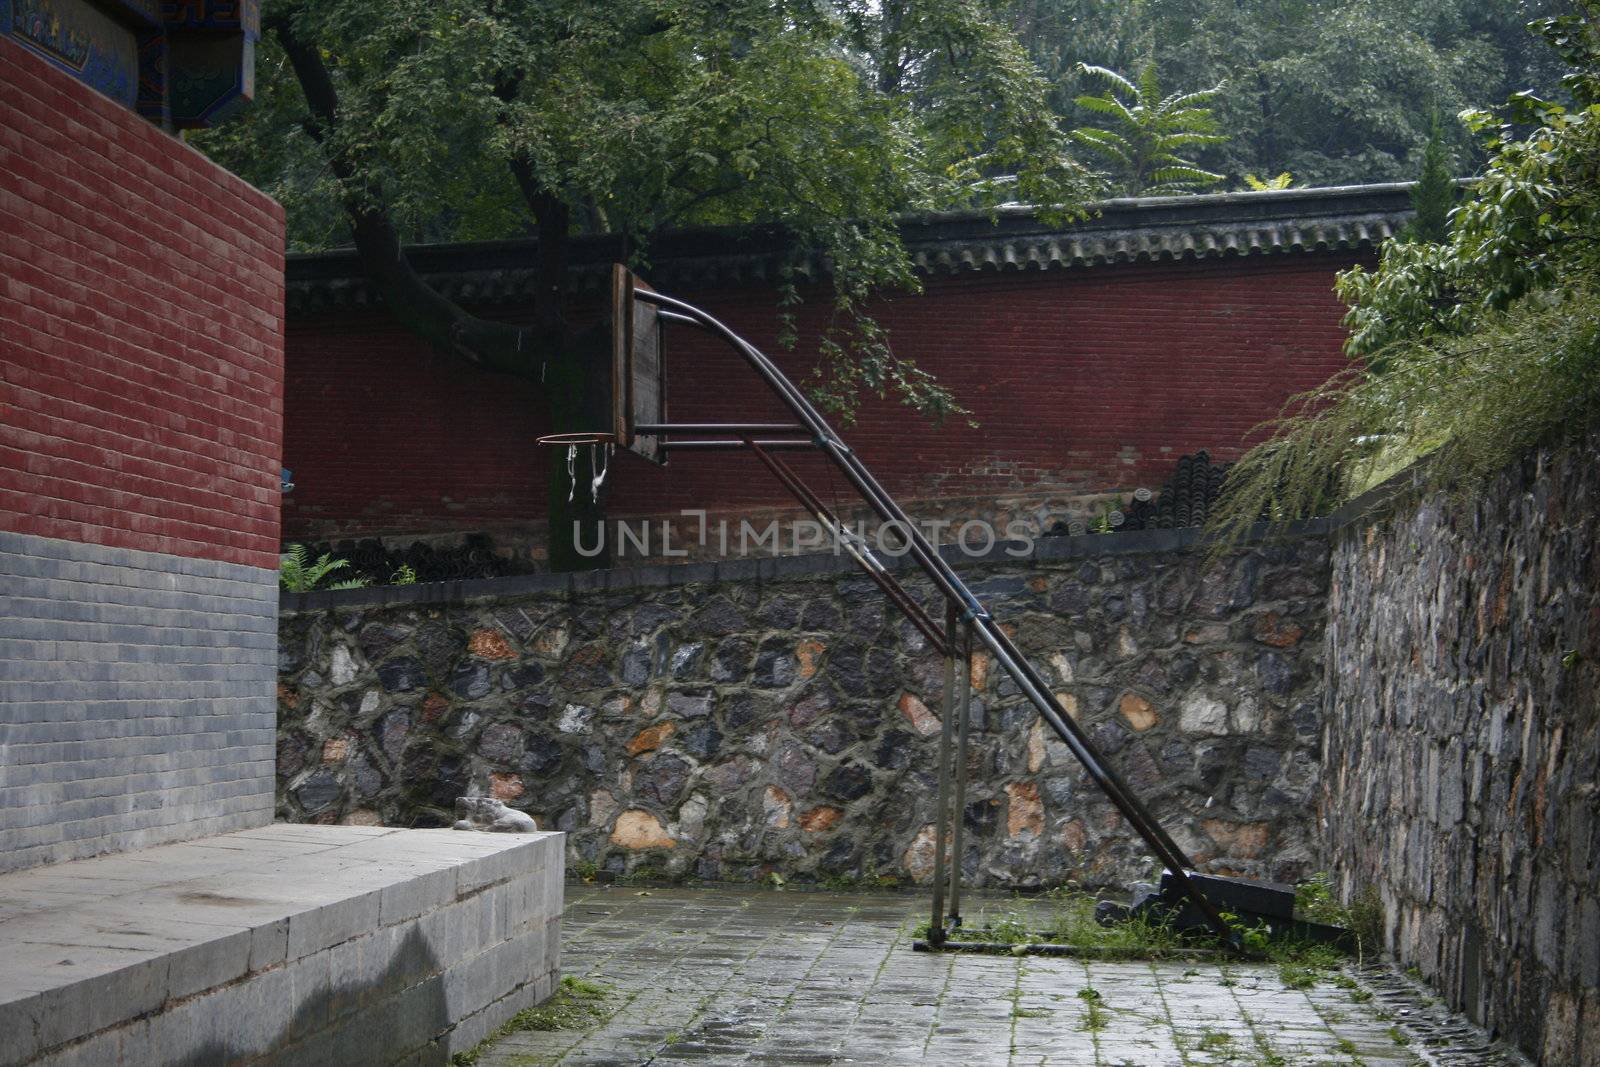 Basketball hoop in the temple of Shaolin monks, China